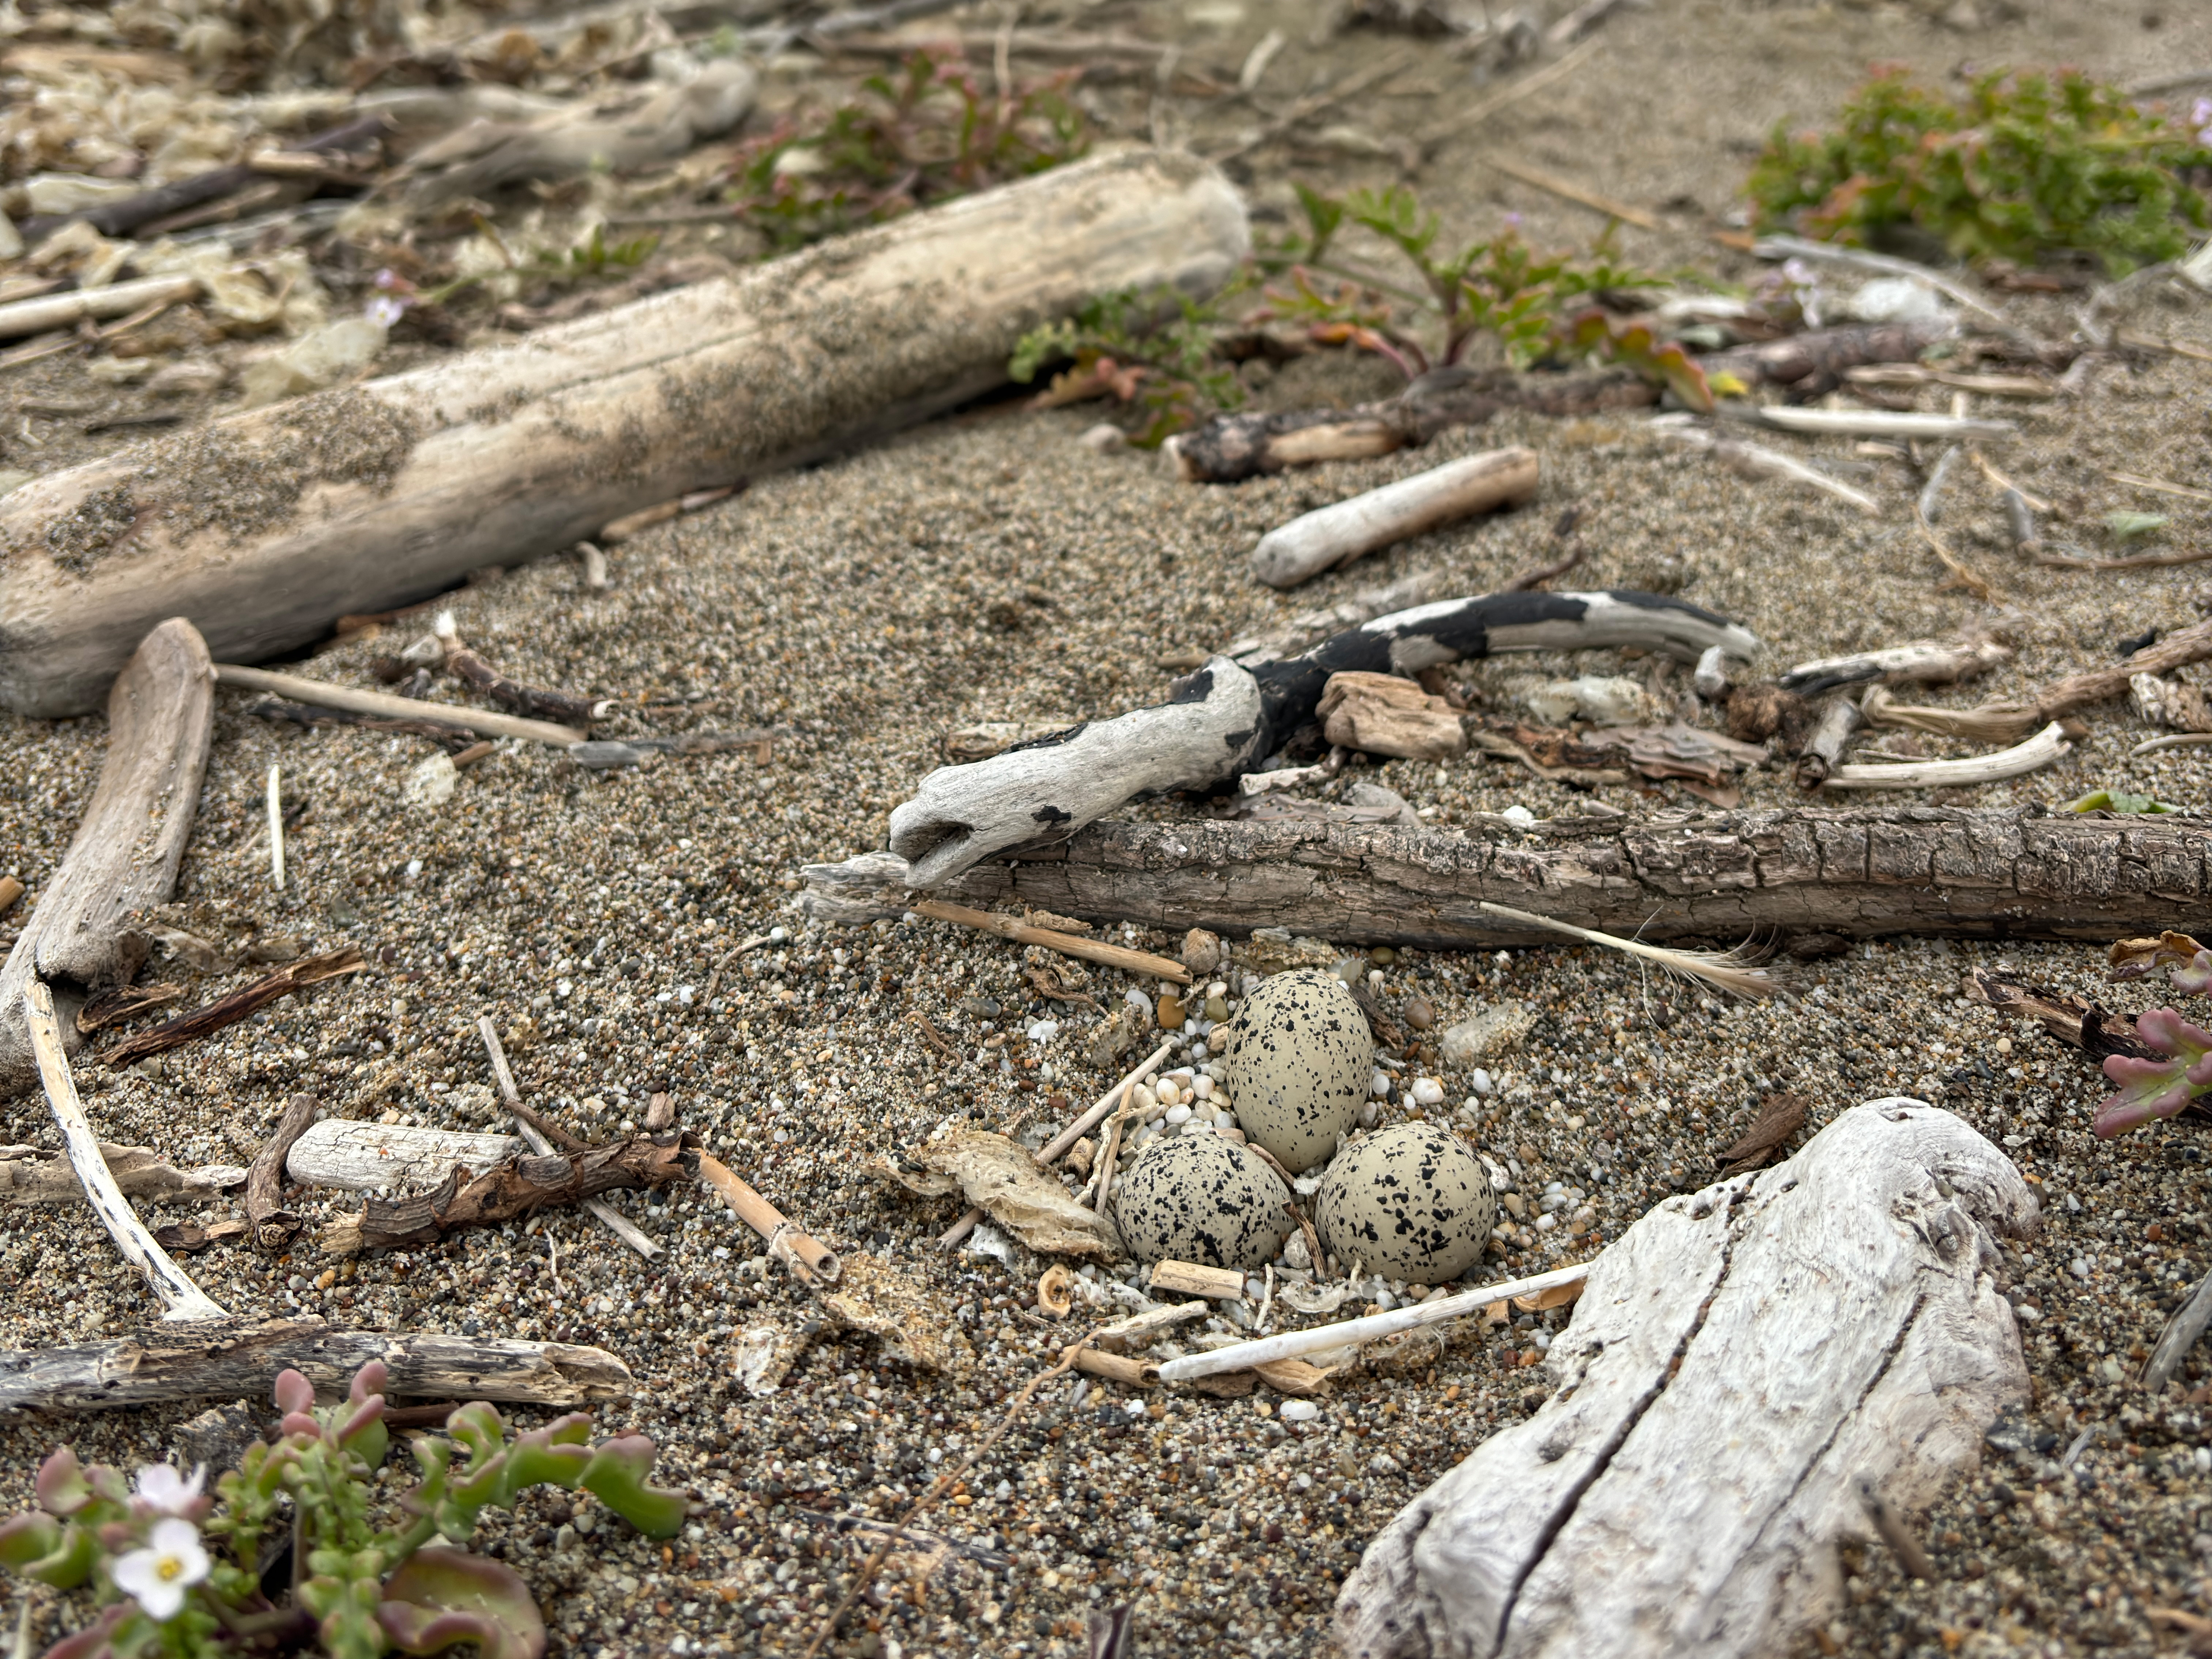 A photo of three small black-speckled, beige-colored eggs sitting on sand between three pieces of driftwood.